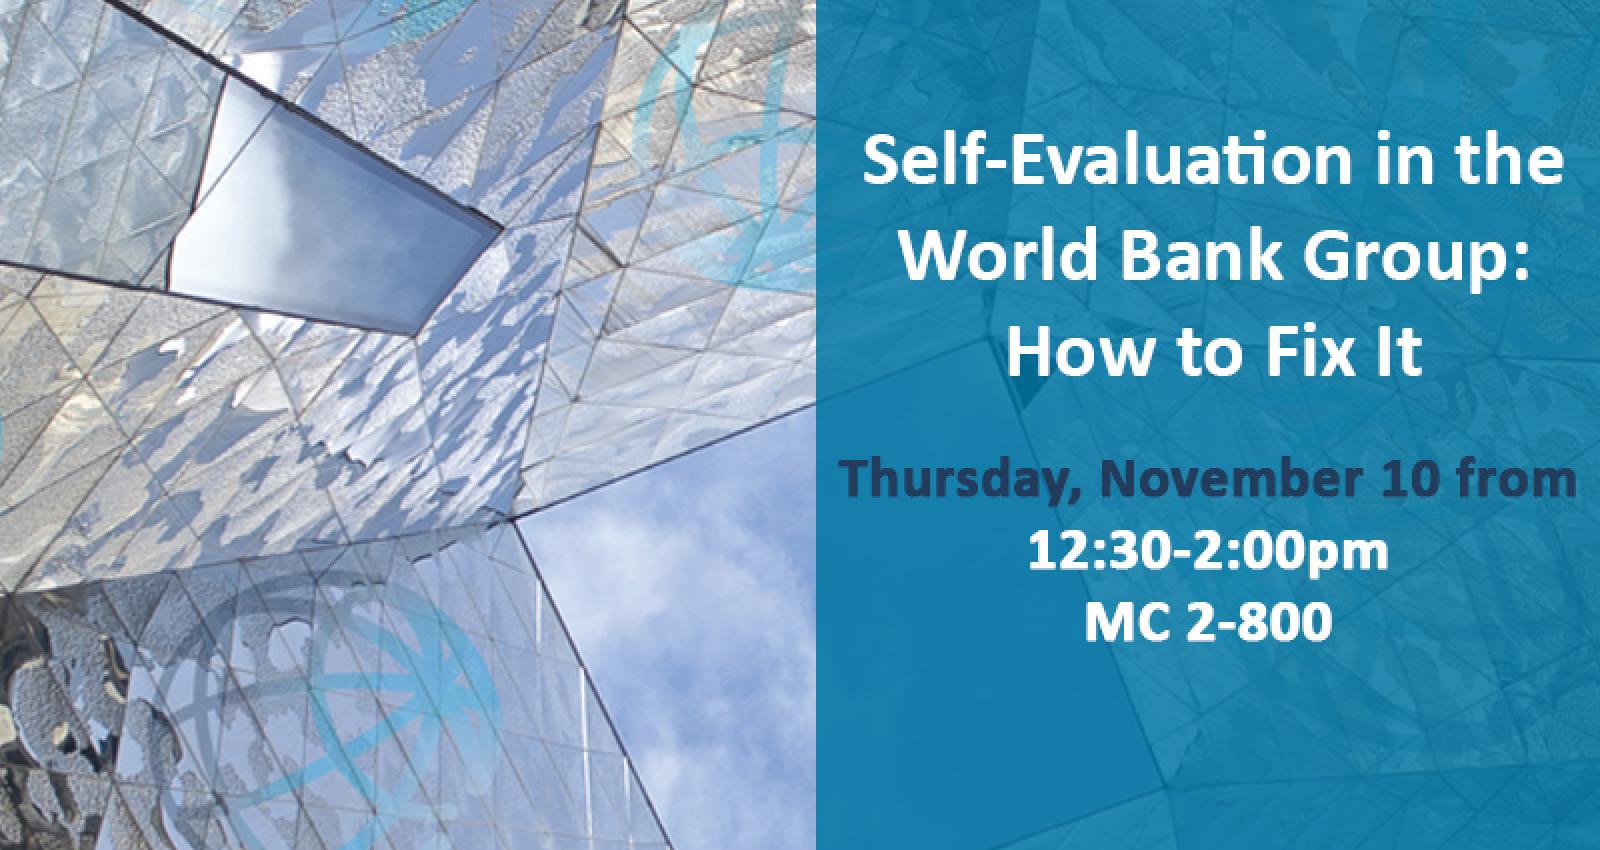 IEG LIVE: Self-Evaluation in the World Bank Group: How to Fix It